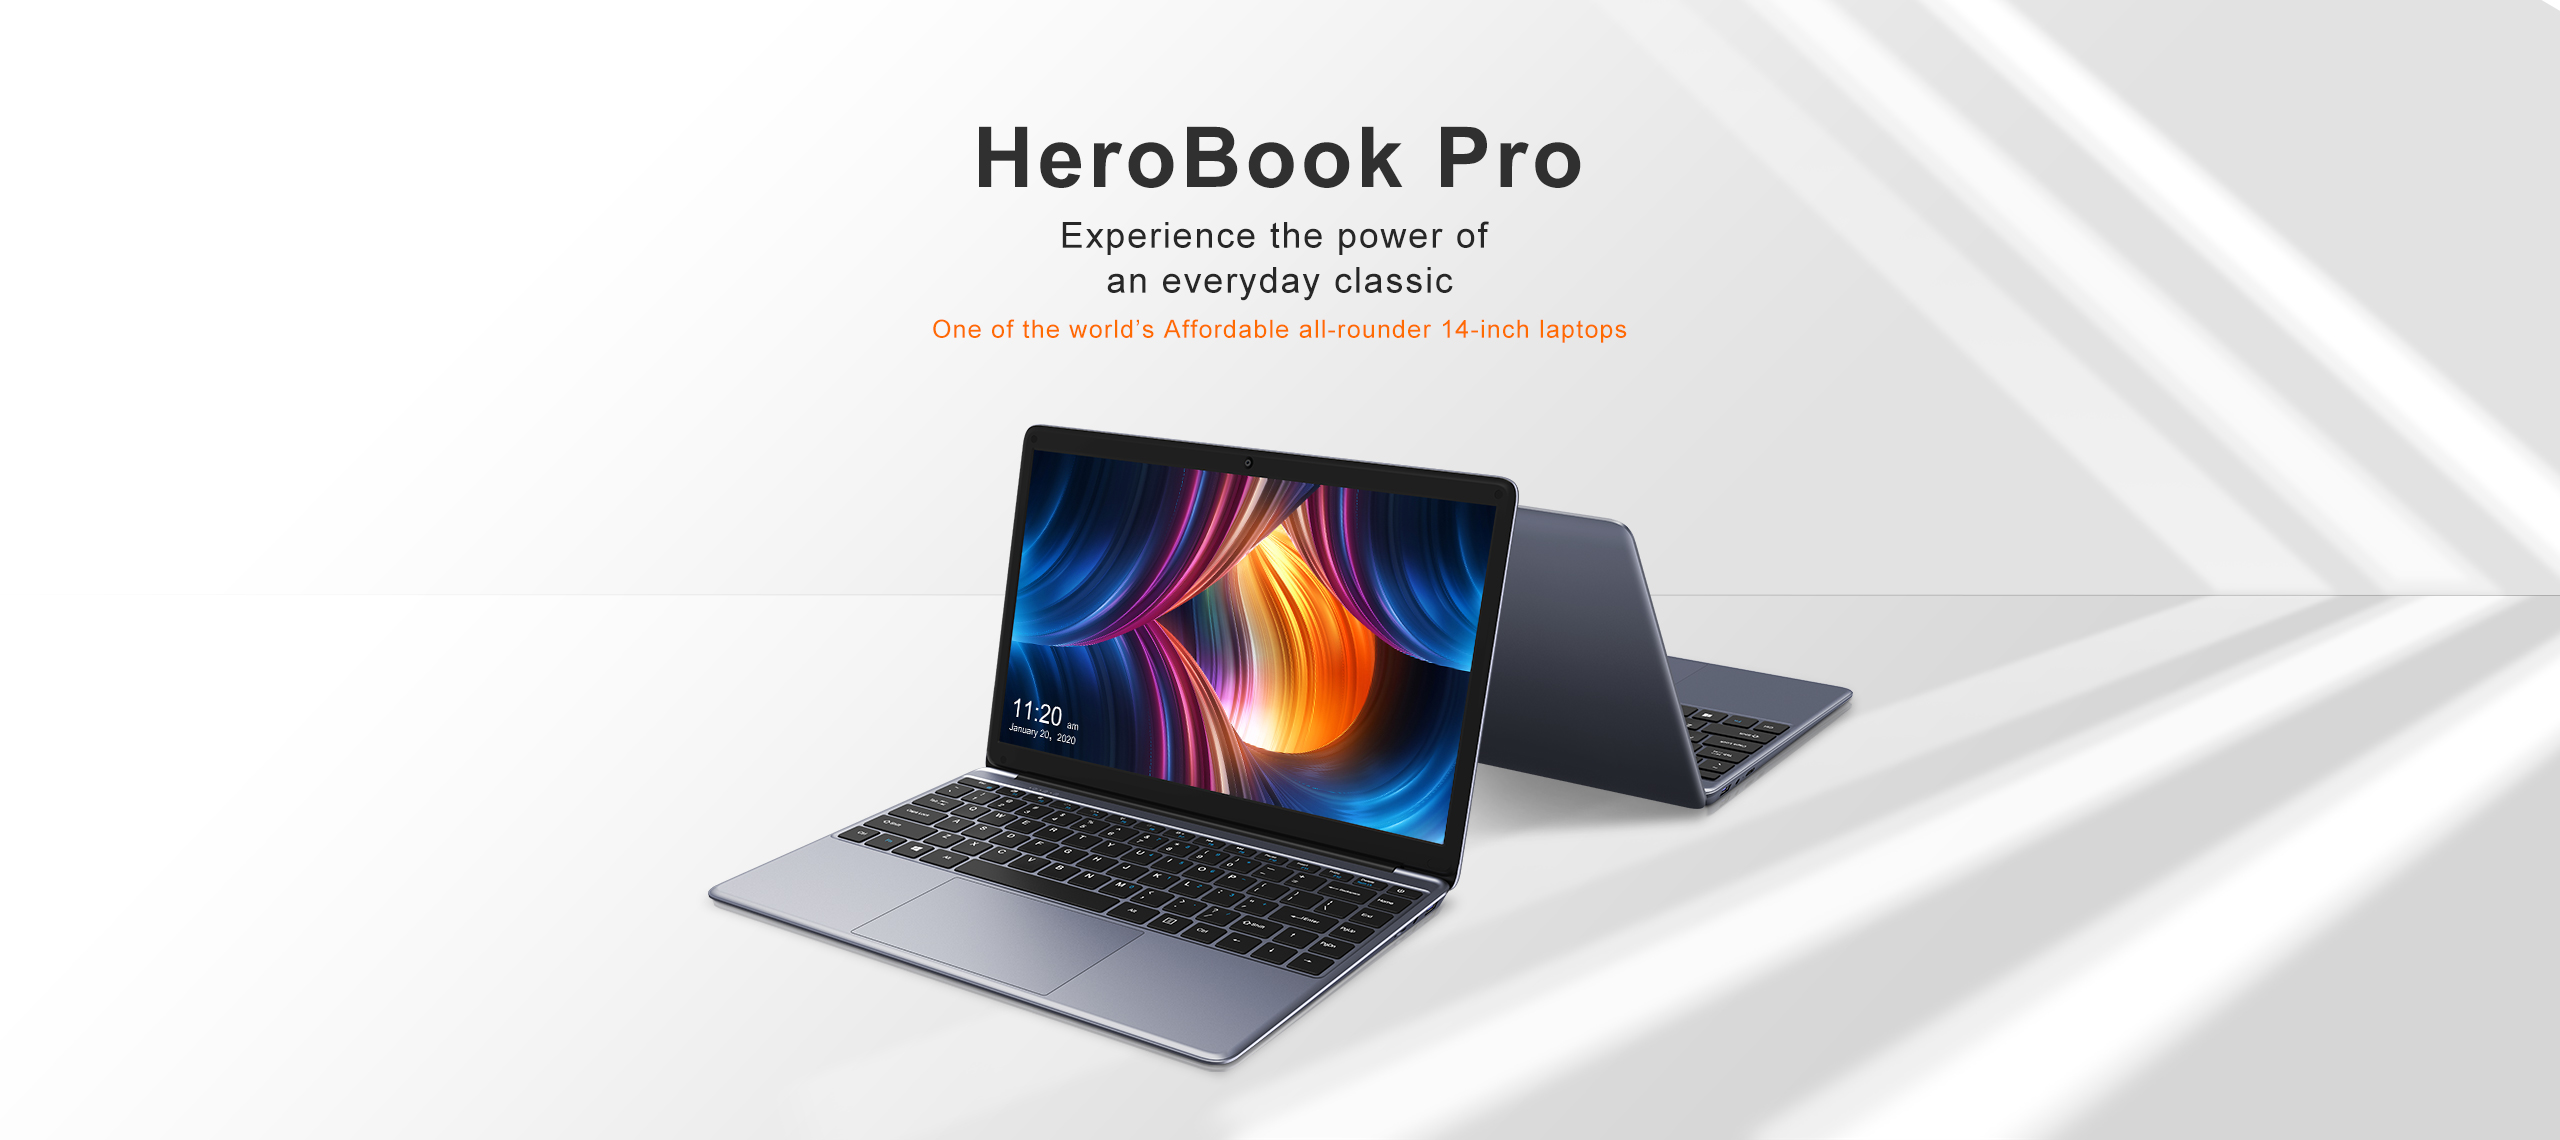 HeroBook Pro-Laptop-Products-Chuwi Official -Laptop, Android 